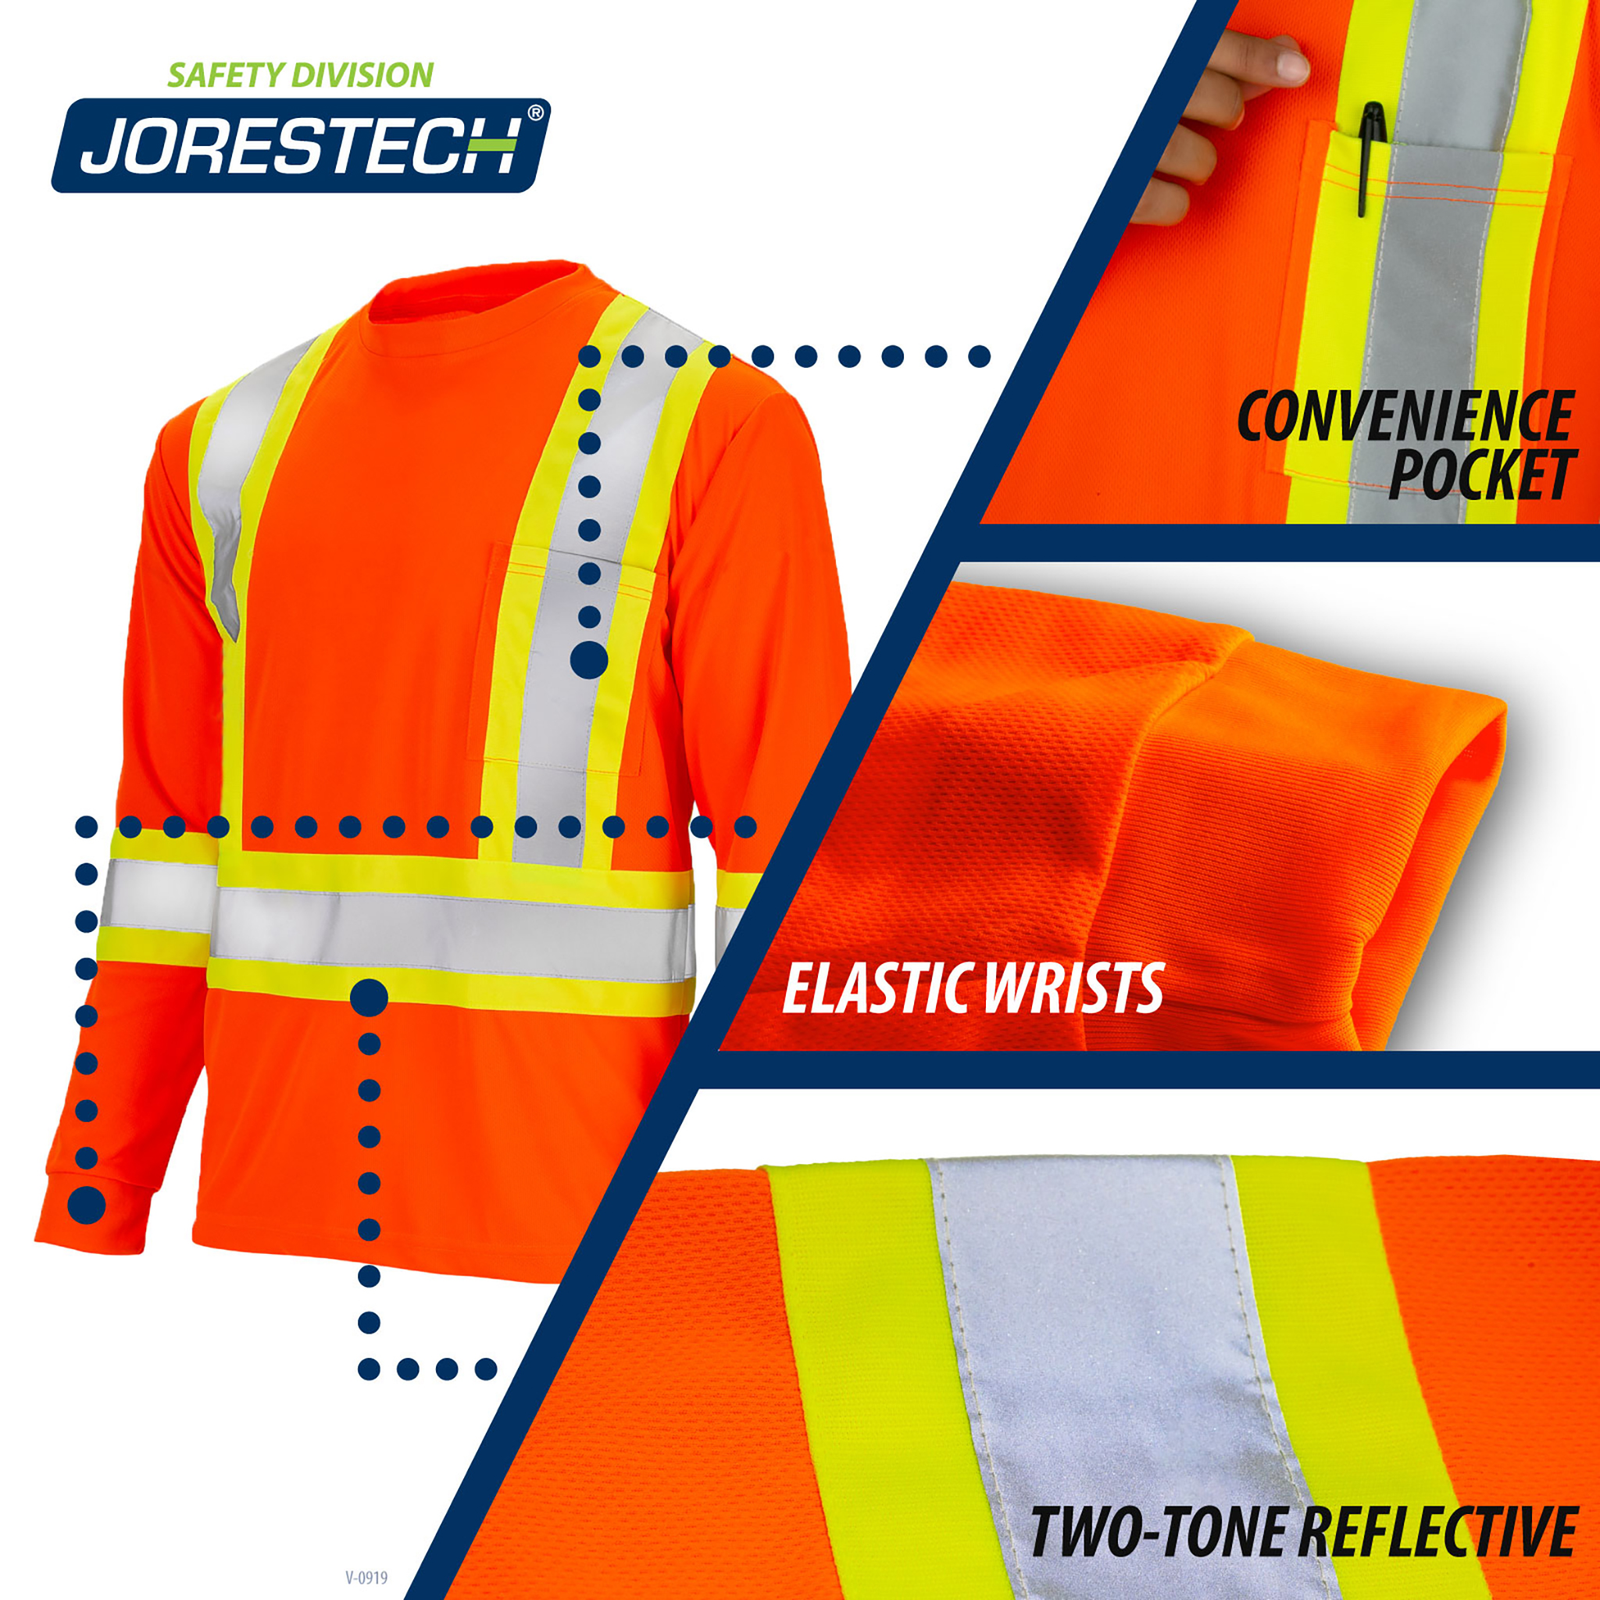 The safety shirt is shown plus 3 call outs that read: Convenience chest pocket, two tone reflective